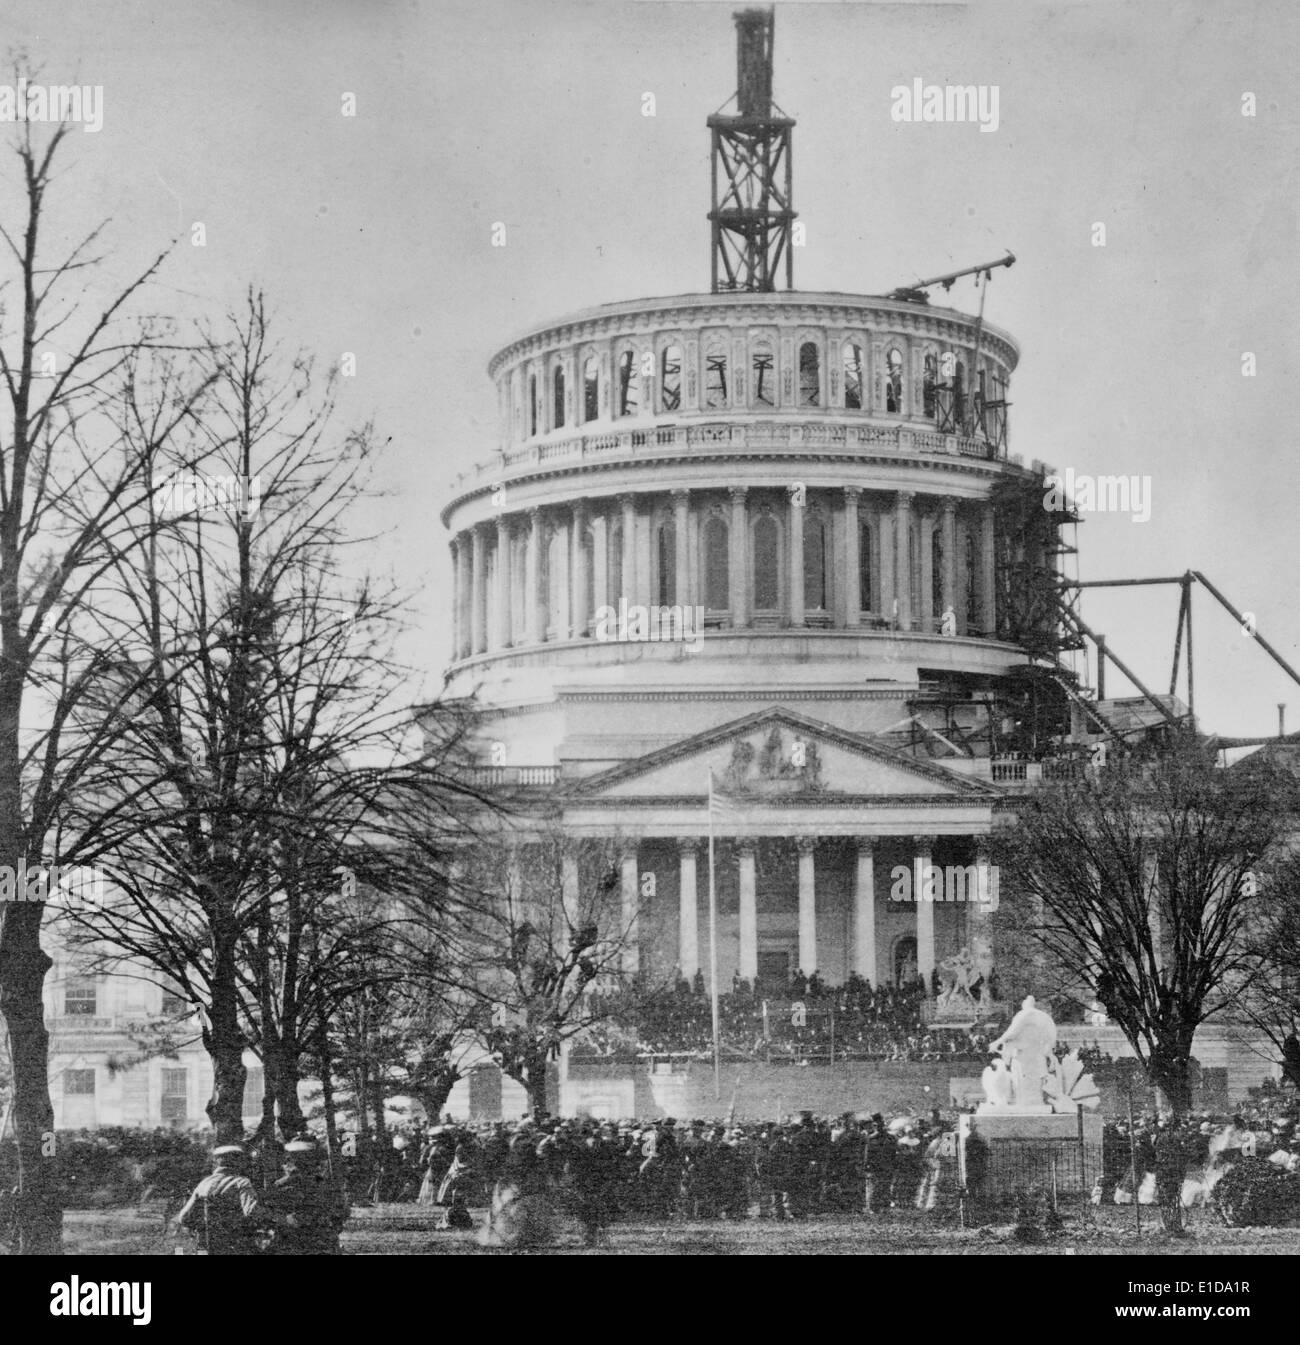 Inauguration of Abraham Lincoln at the U.S. Capitol, 1861.  Crowds of people viewing Abraham Lincoln's inauguration at the east front of the U.S. Capitol, with the Capitol dome under construction. Stock Photo